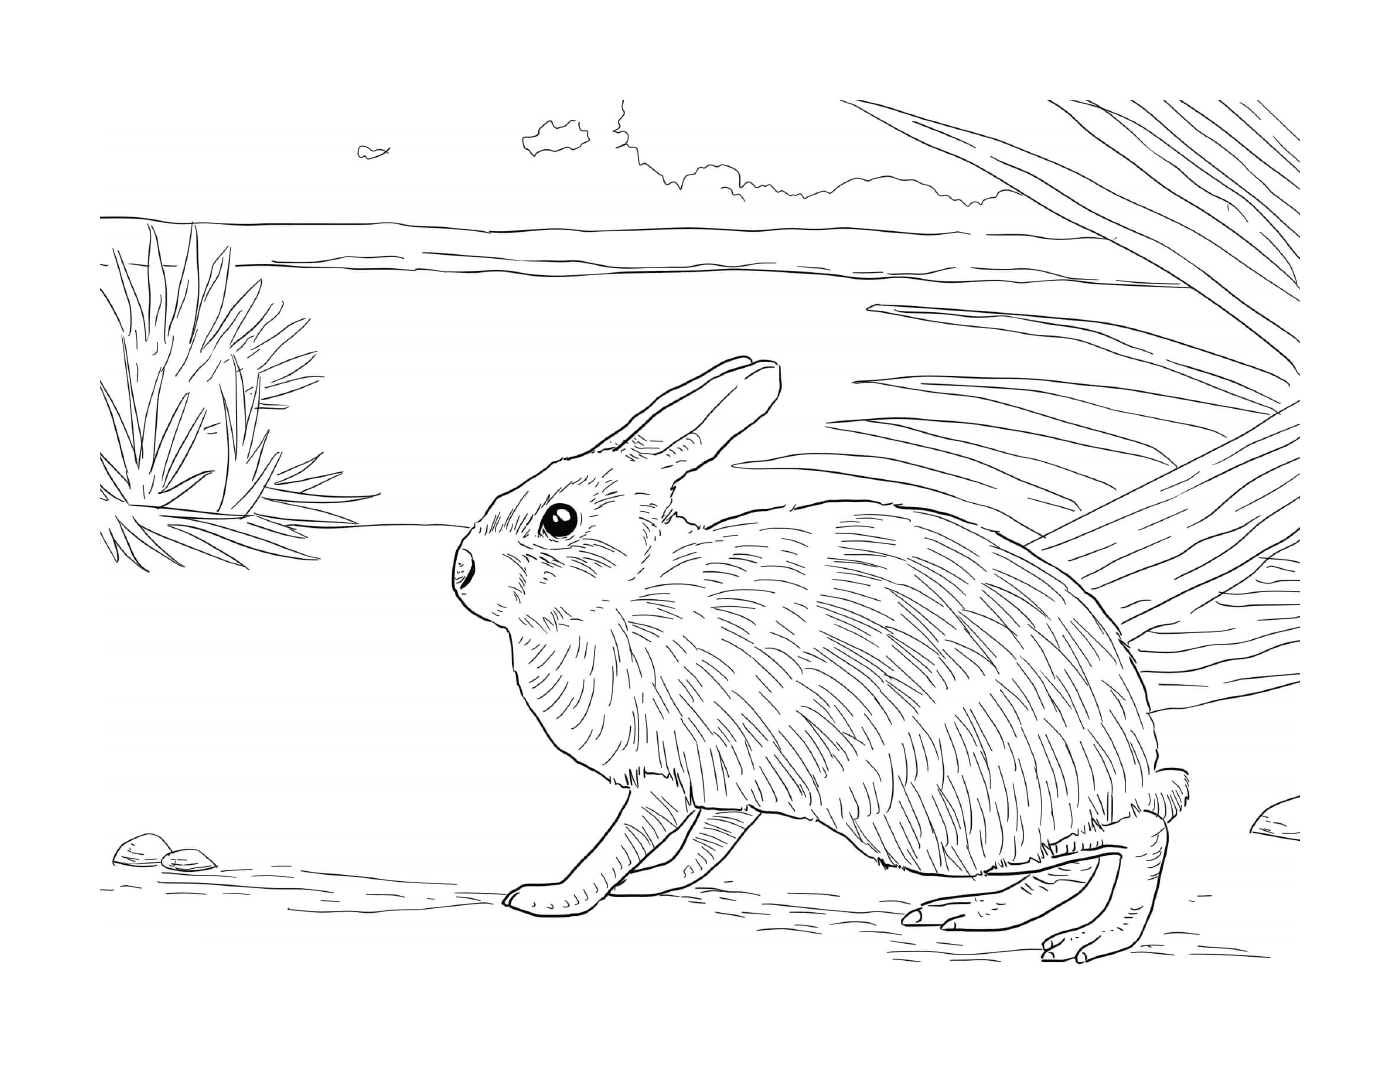  Realistic rabbit in a natural setting 